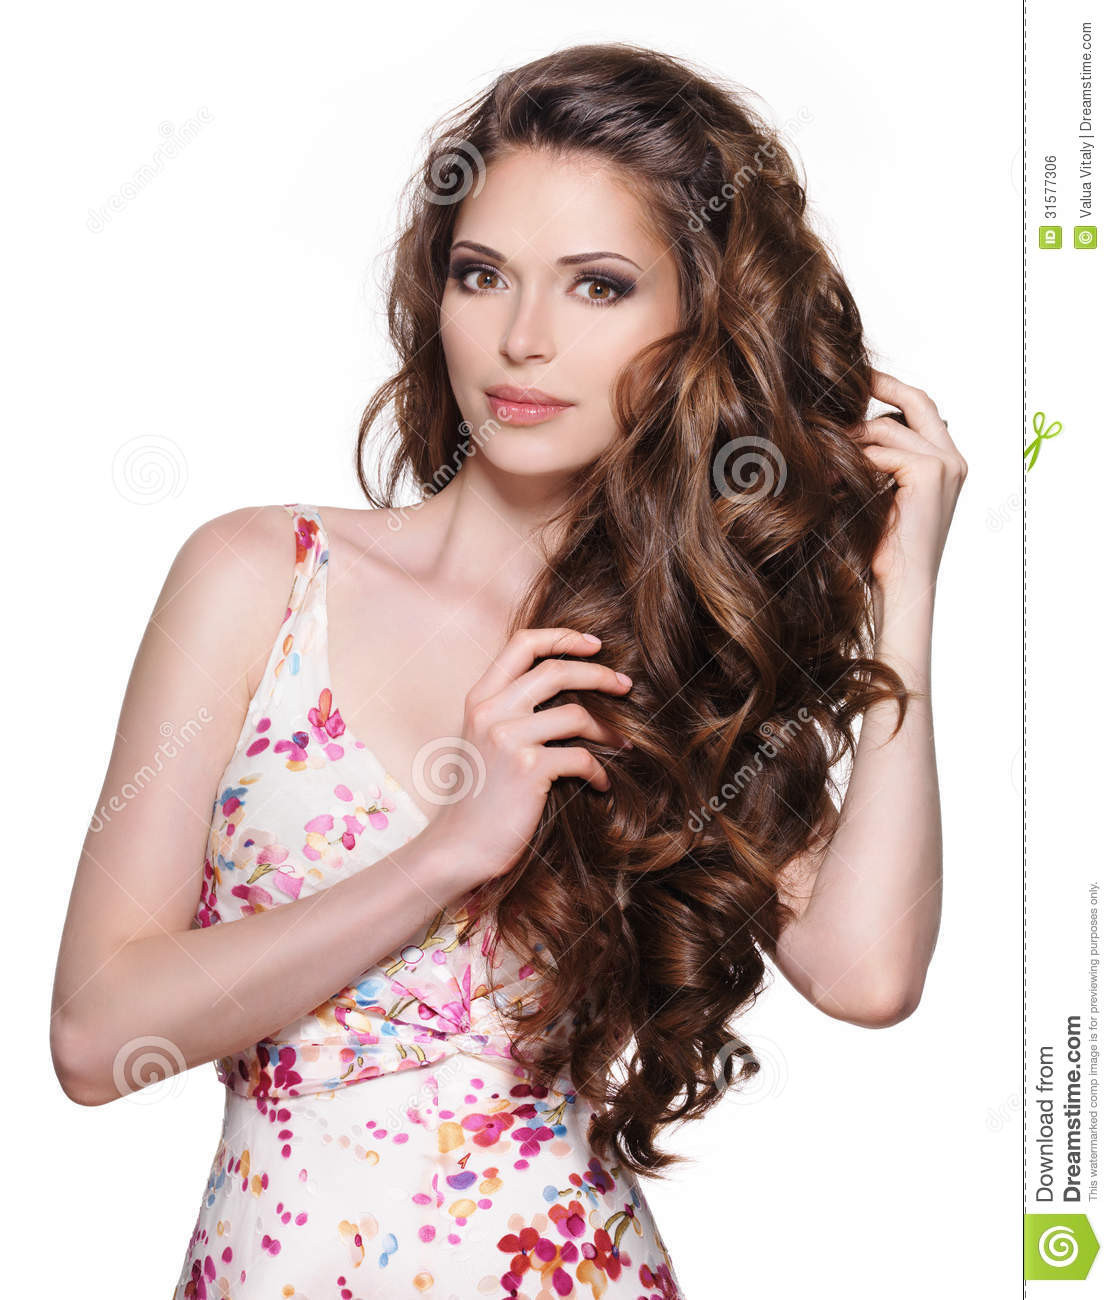 Beautiful Adult Women
 Beautiful Adult Woman With Long Brown Curly Hair Stock